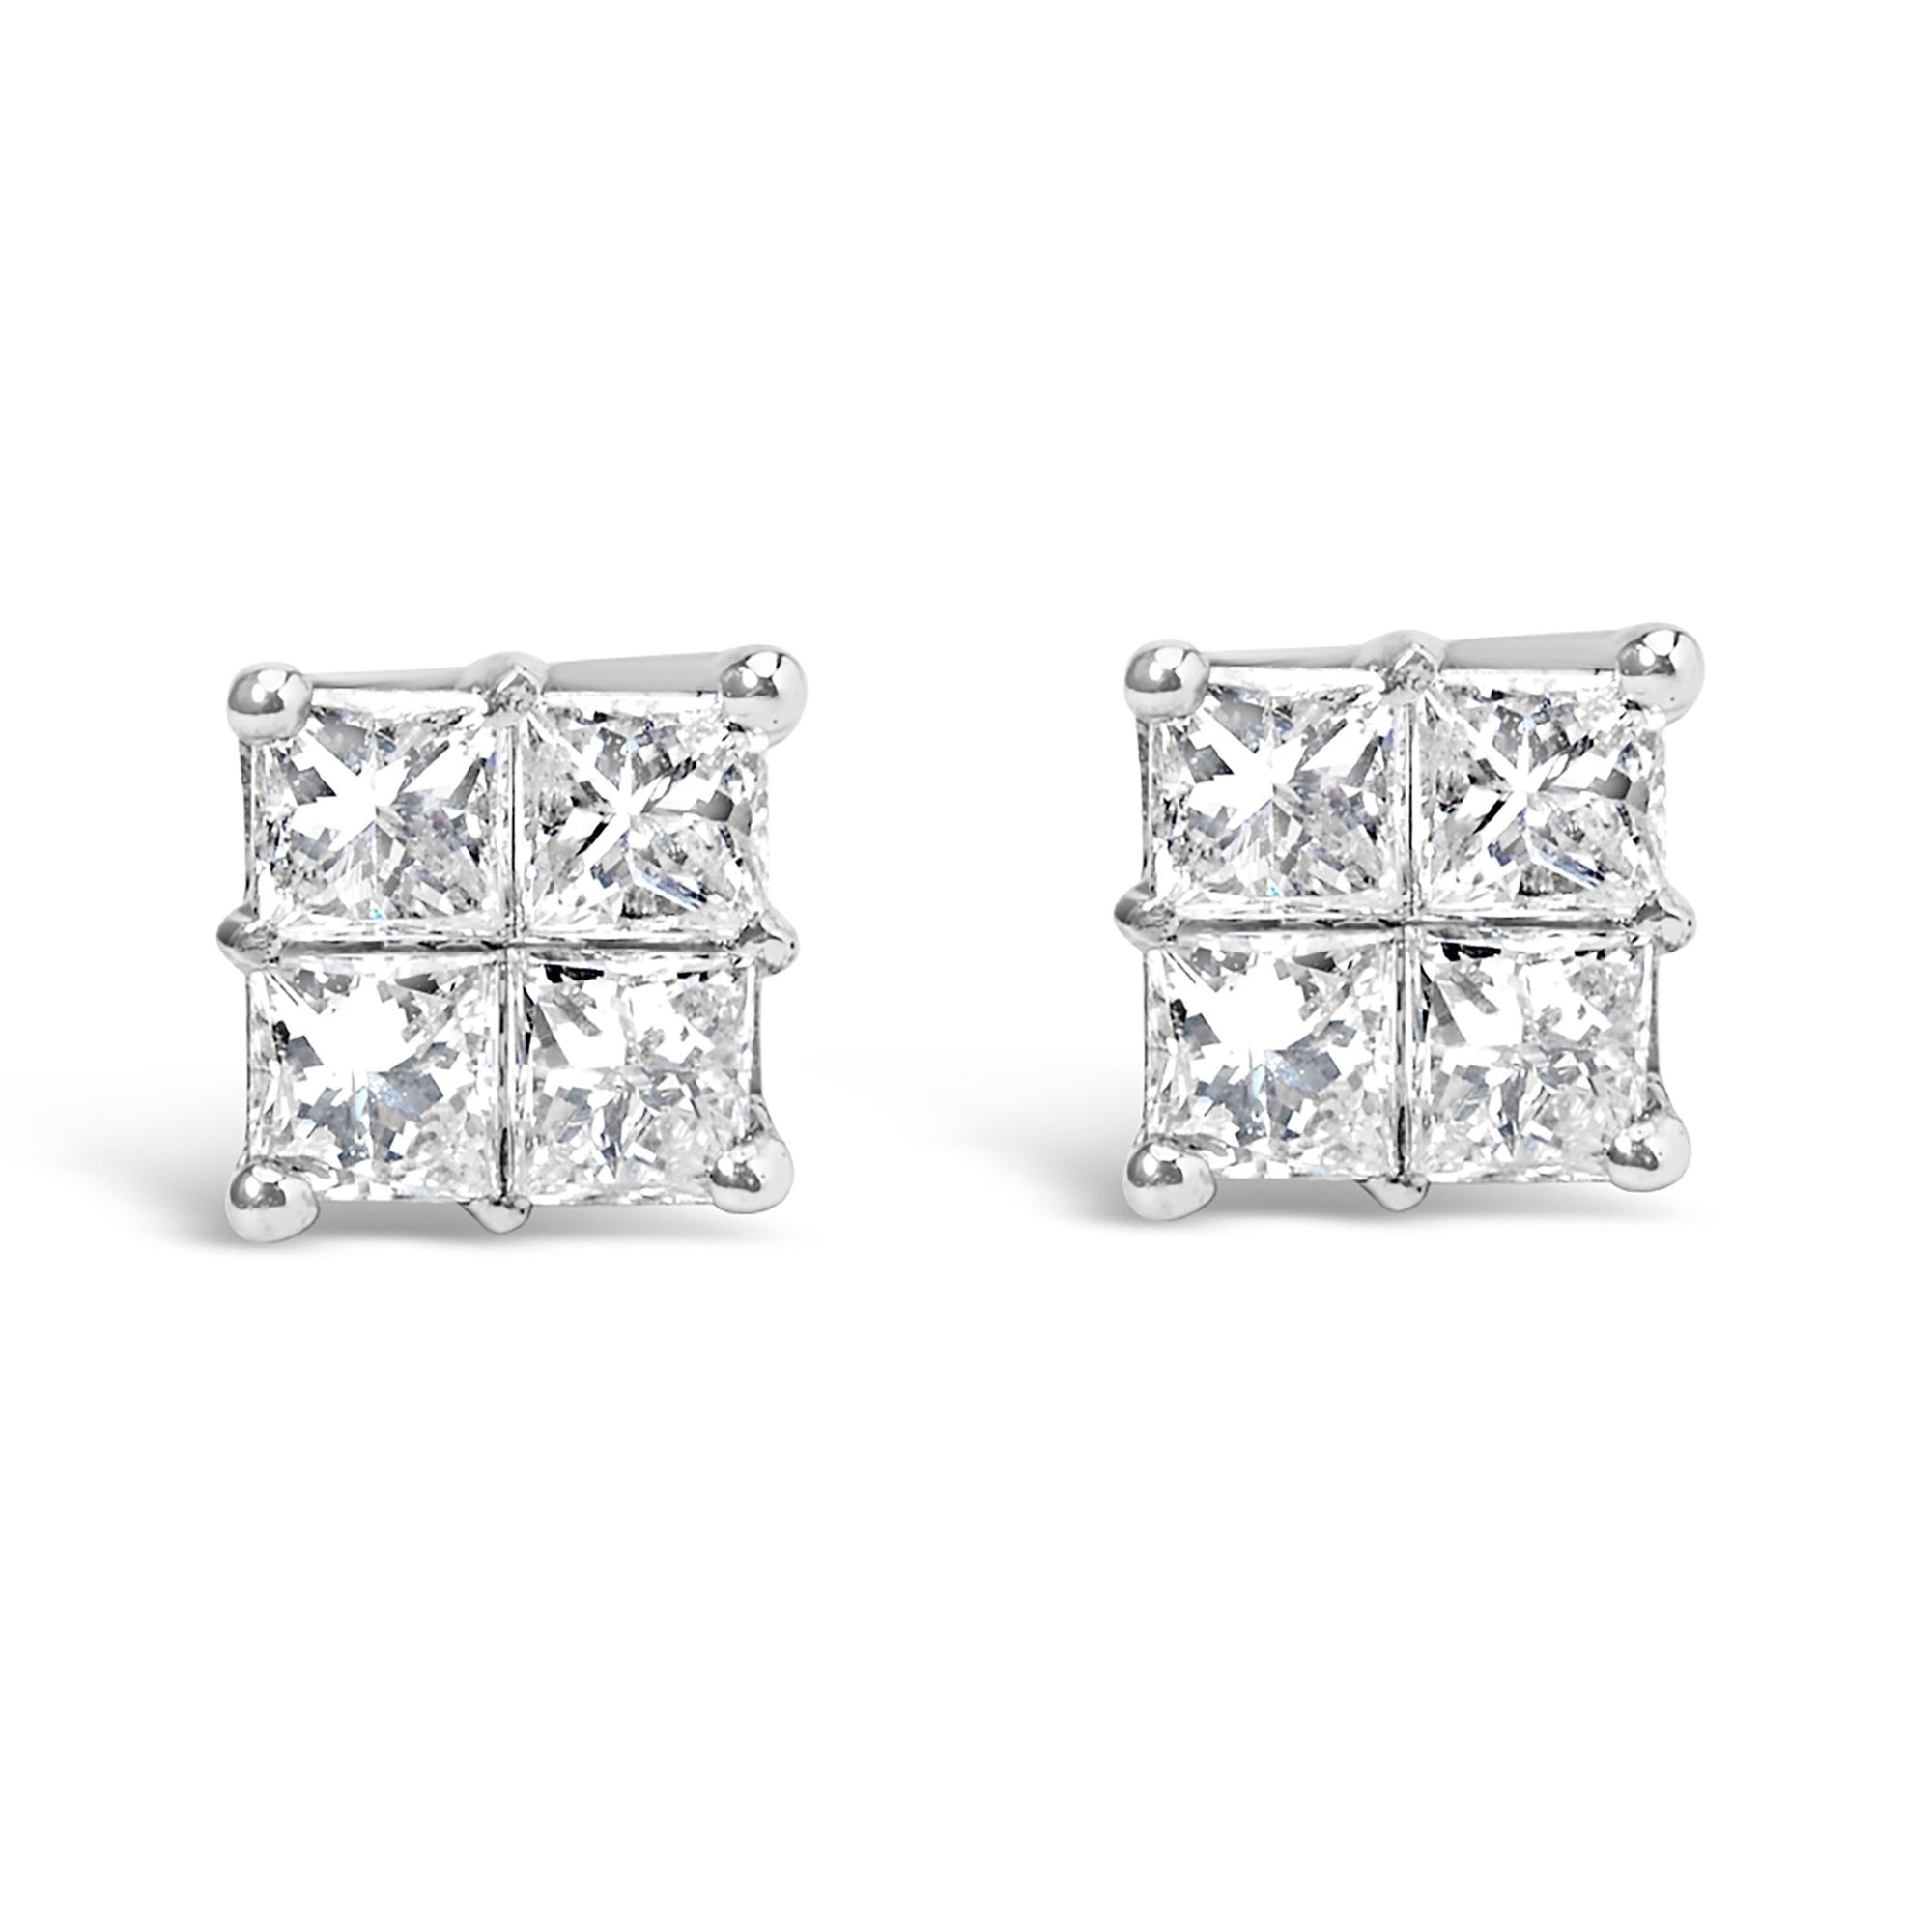 10KT White Gold Diamond Composite Stud Earring (1/4 cttw, H-I Color, I1-I2 Clarity) - LinkagejewelrydesignLinkagejewelrydesign